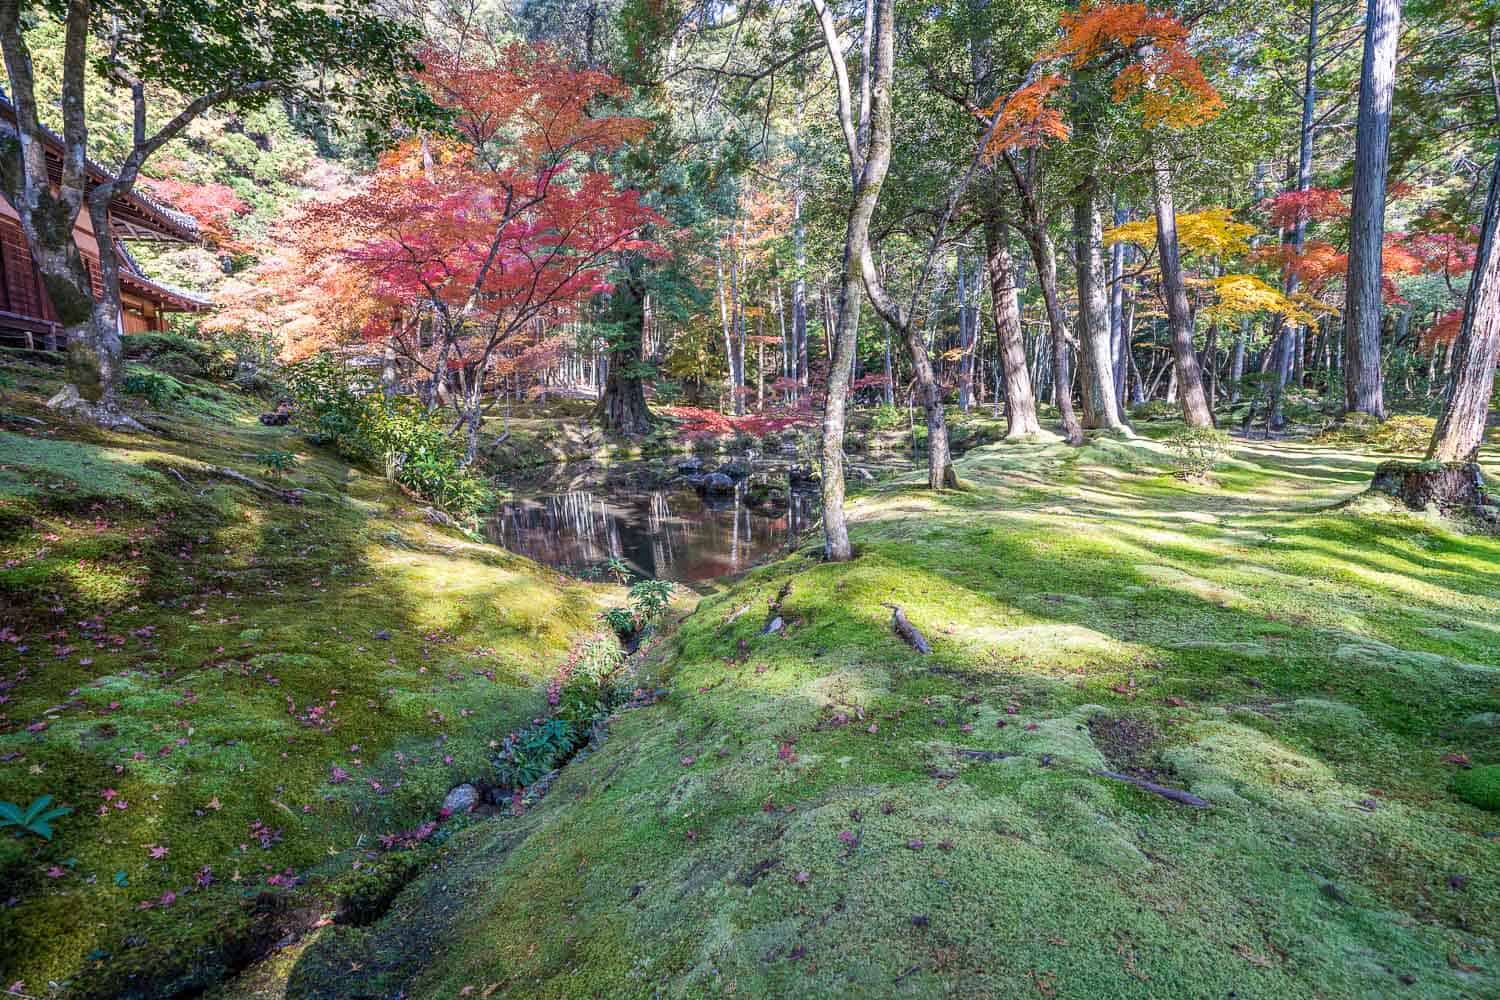 Red maples contrasted against the green moss at Moss Temple, Kyoto, Japan